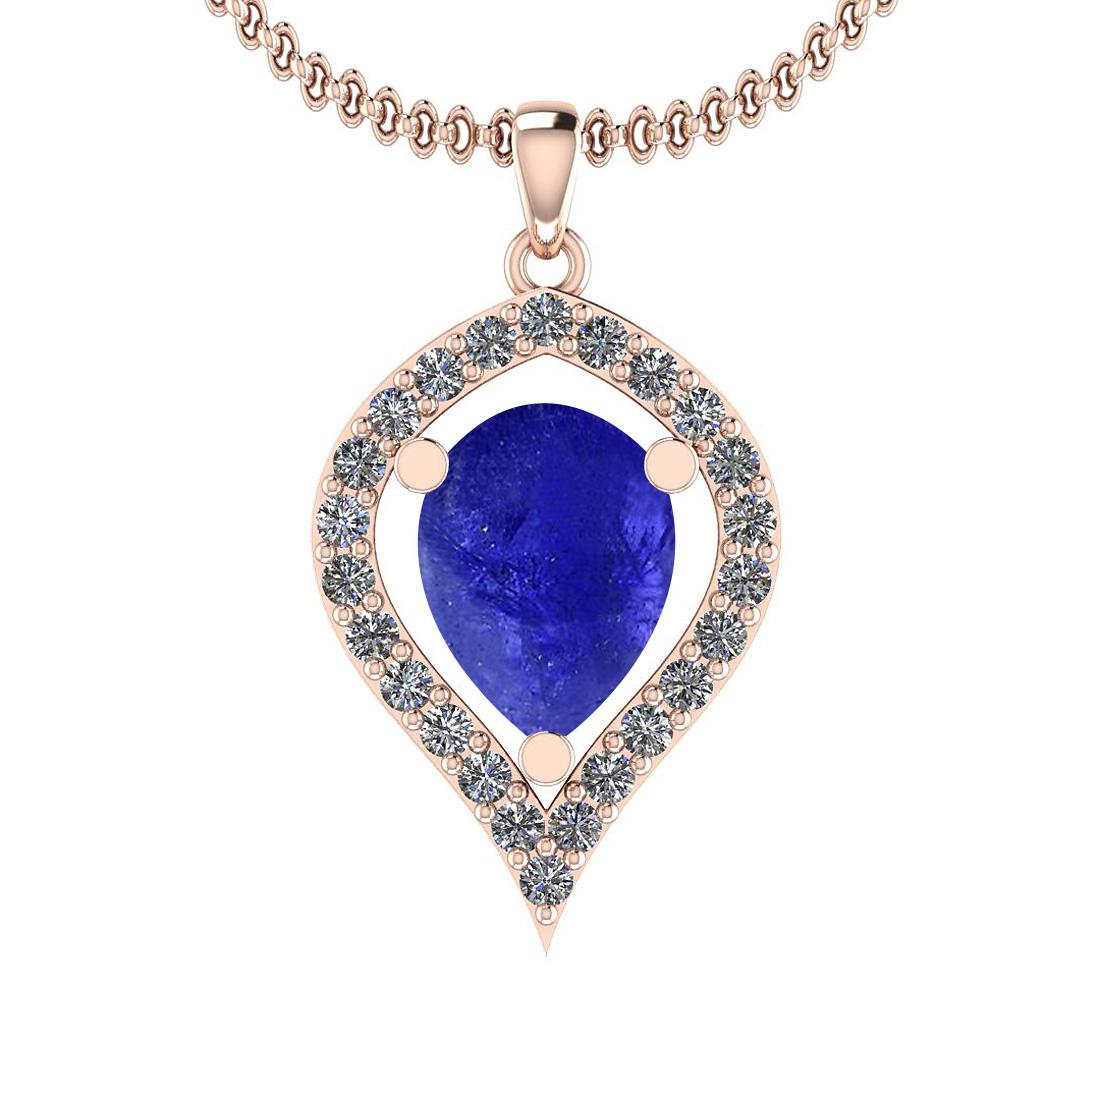 Certified 6.64 Ctw Tanzanite and Diamond I1/I2 14K Rose Gold Victorian Style Pendant